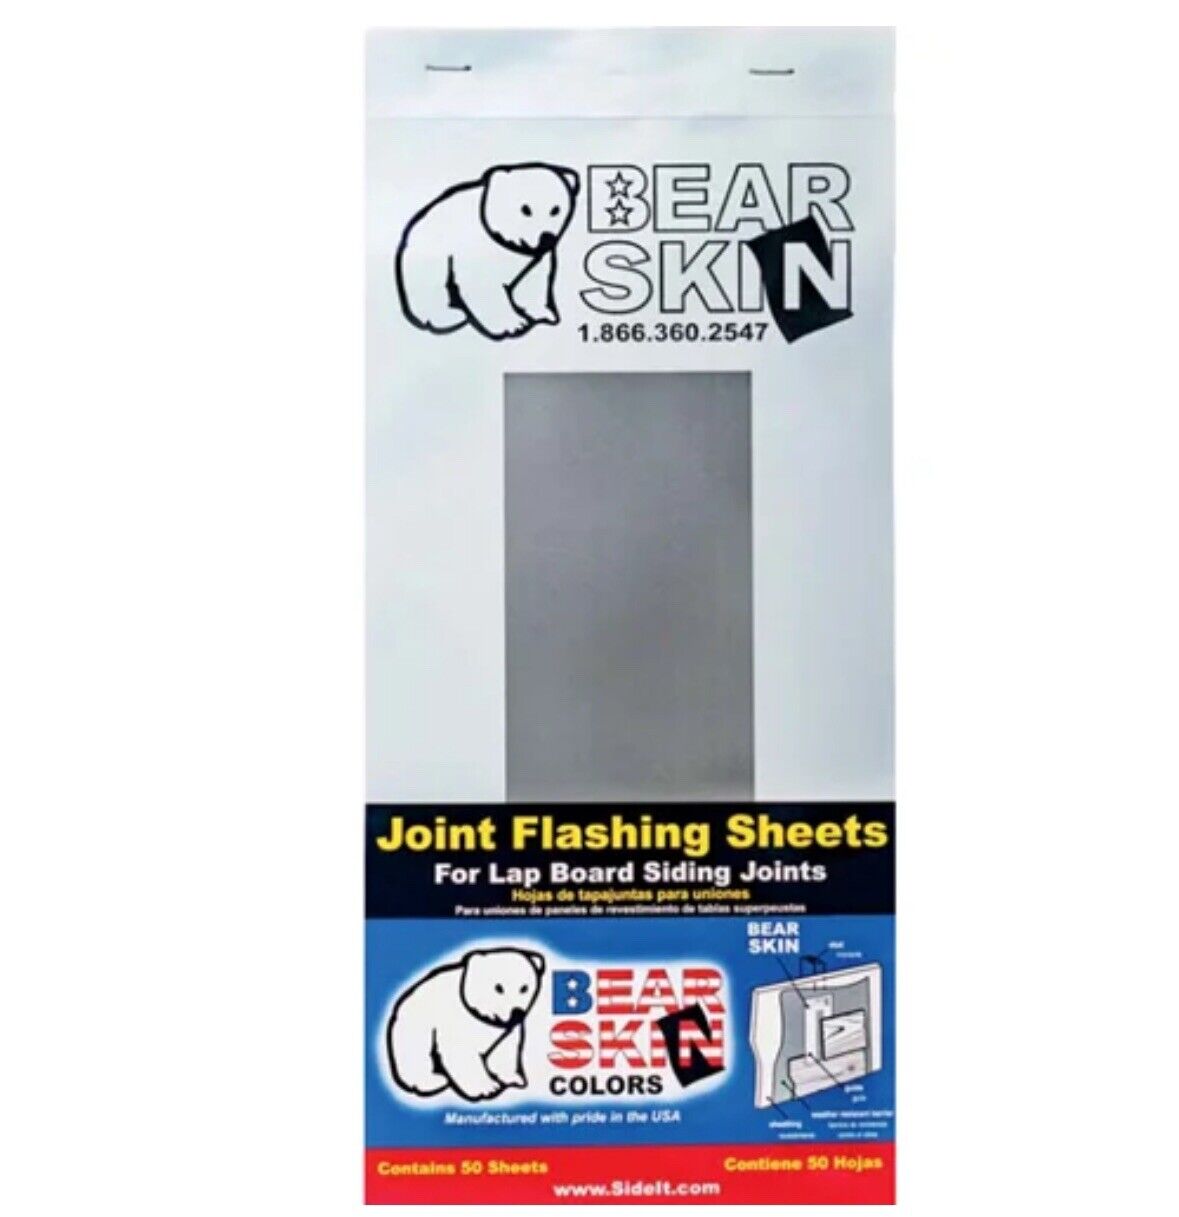 New Bear Skin Joint Flashing Sheets For Lap Board Siding Joints, 50 Sheets